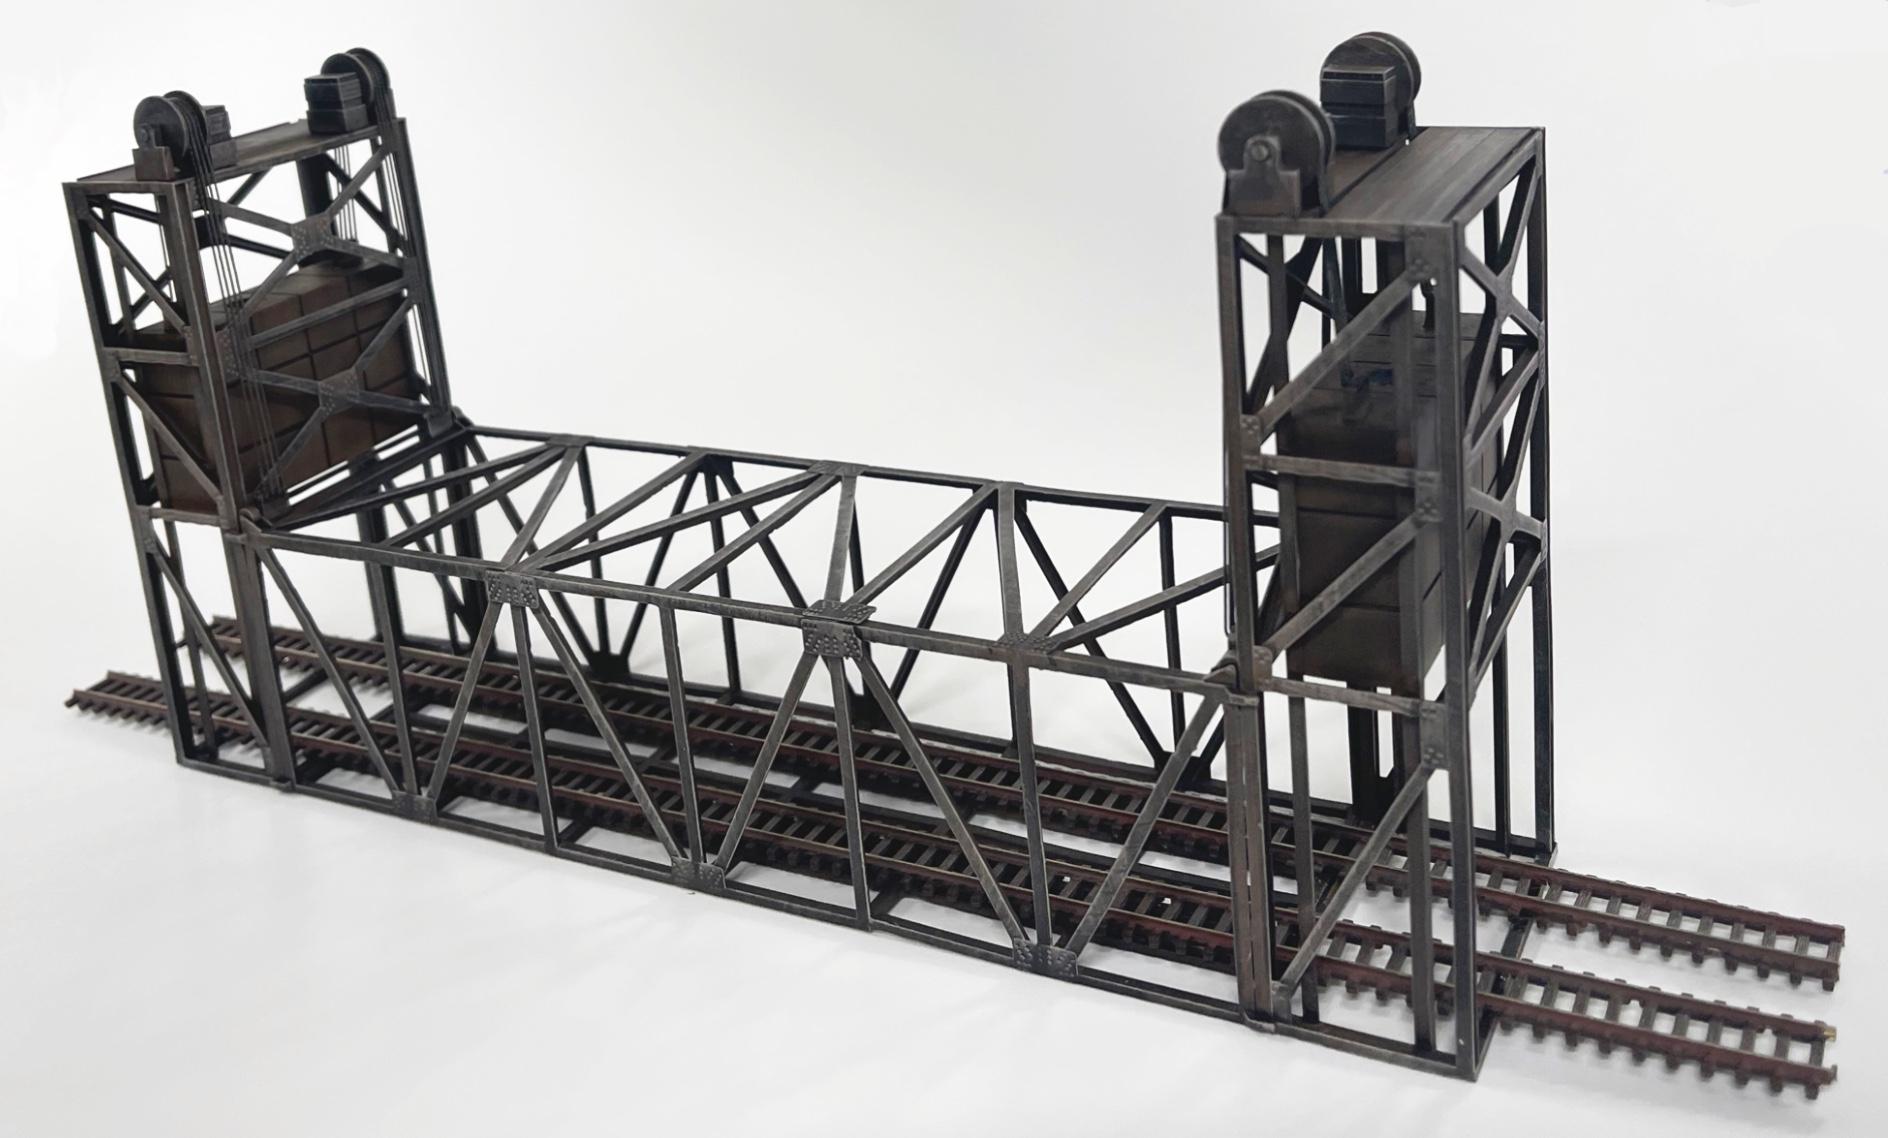 Double Track, HO-Scale lift bridge with counterweights. Adjustable length.
